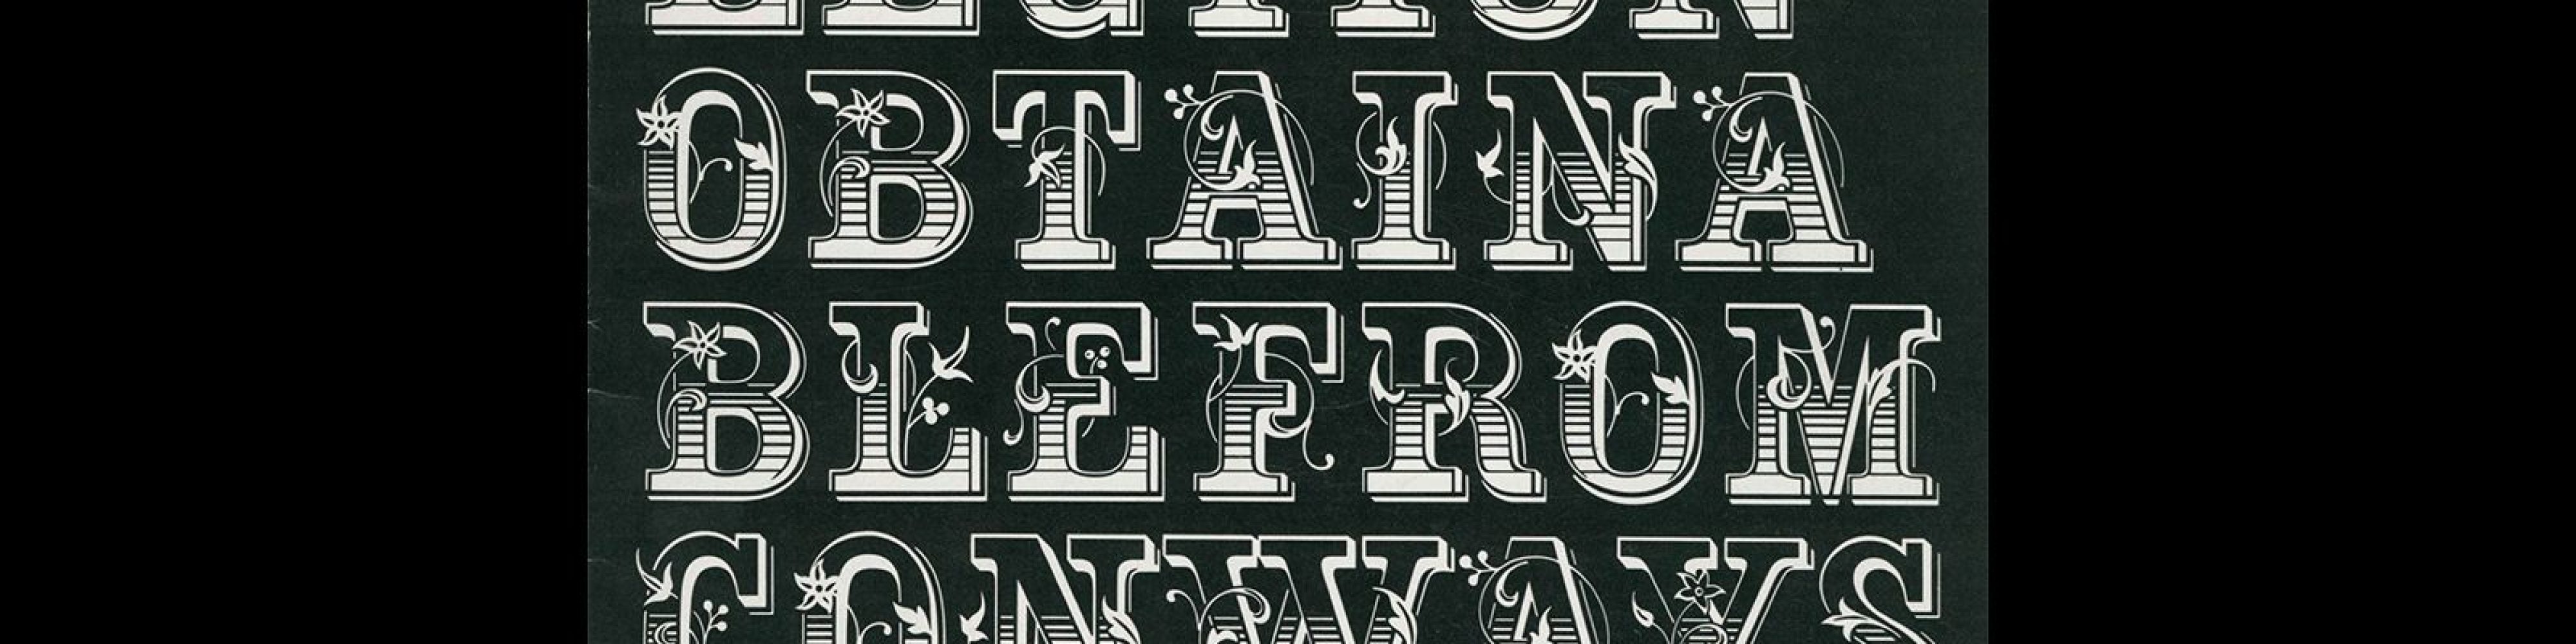 TJ Lyons Type Collection Obtainable from Conways, 1972. Designed by Pentagram